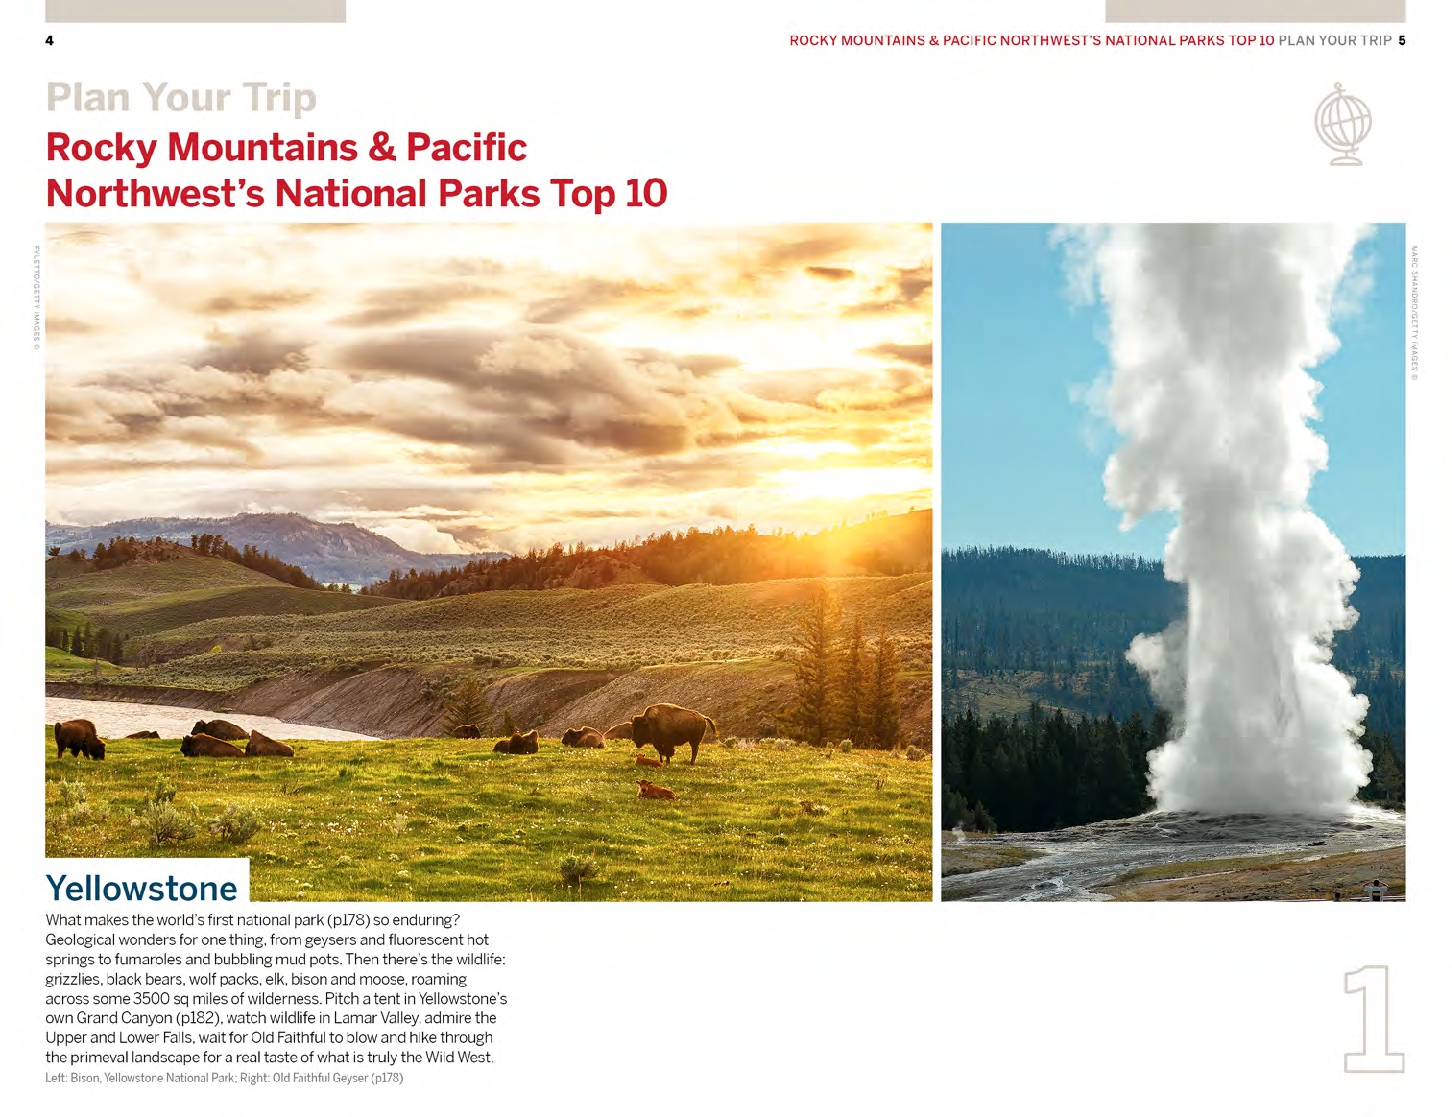 Rocky Mountains & Pacific Northwest's National Parks 1